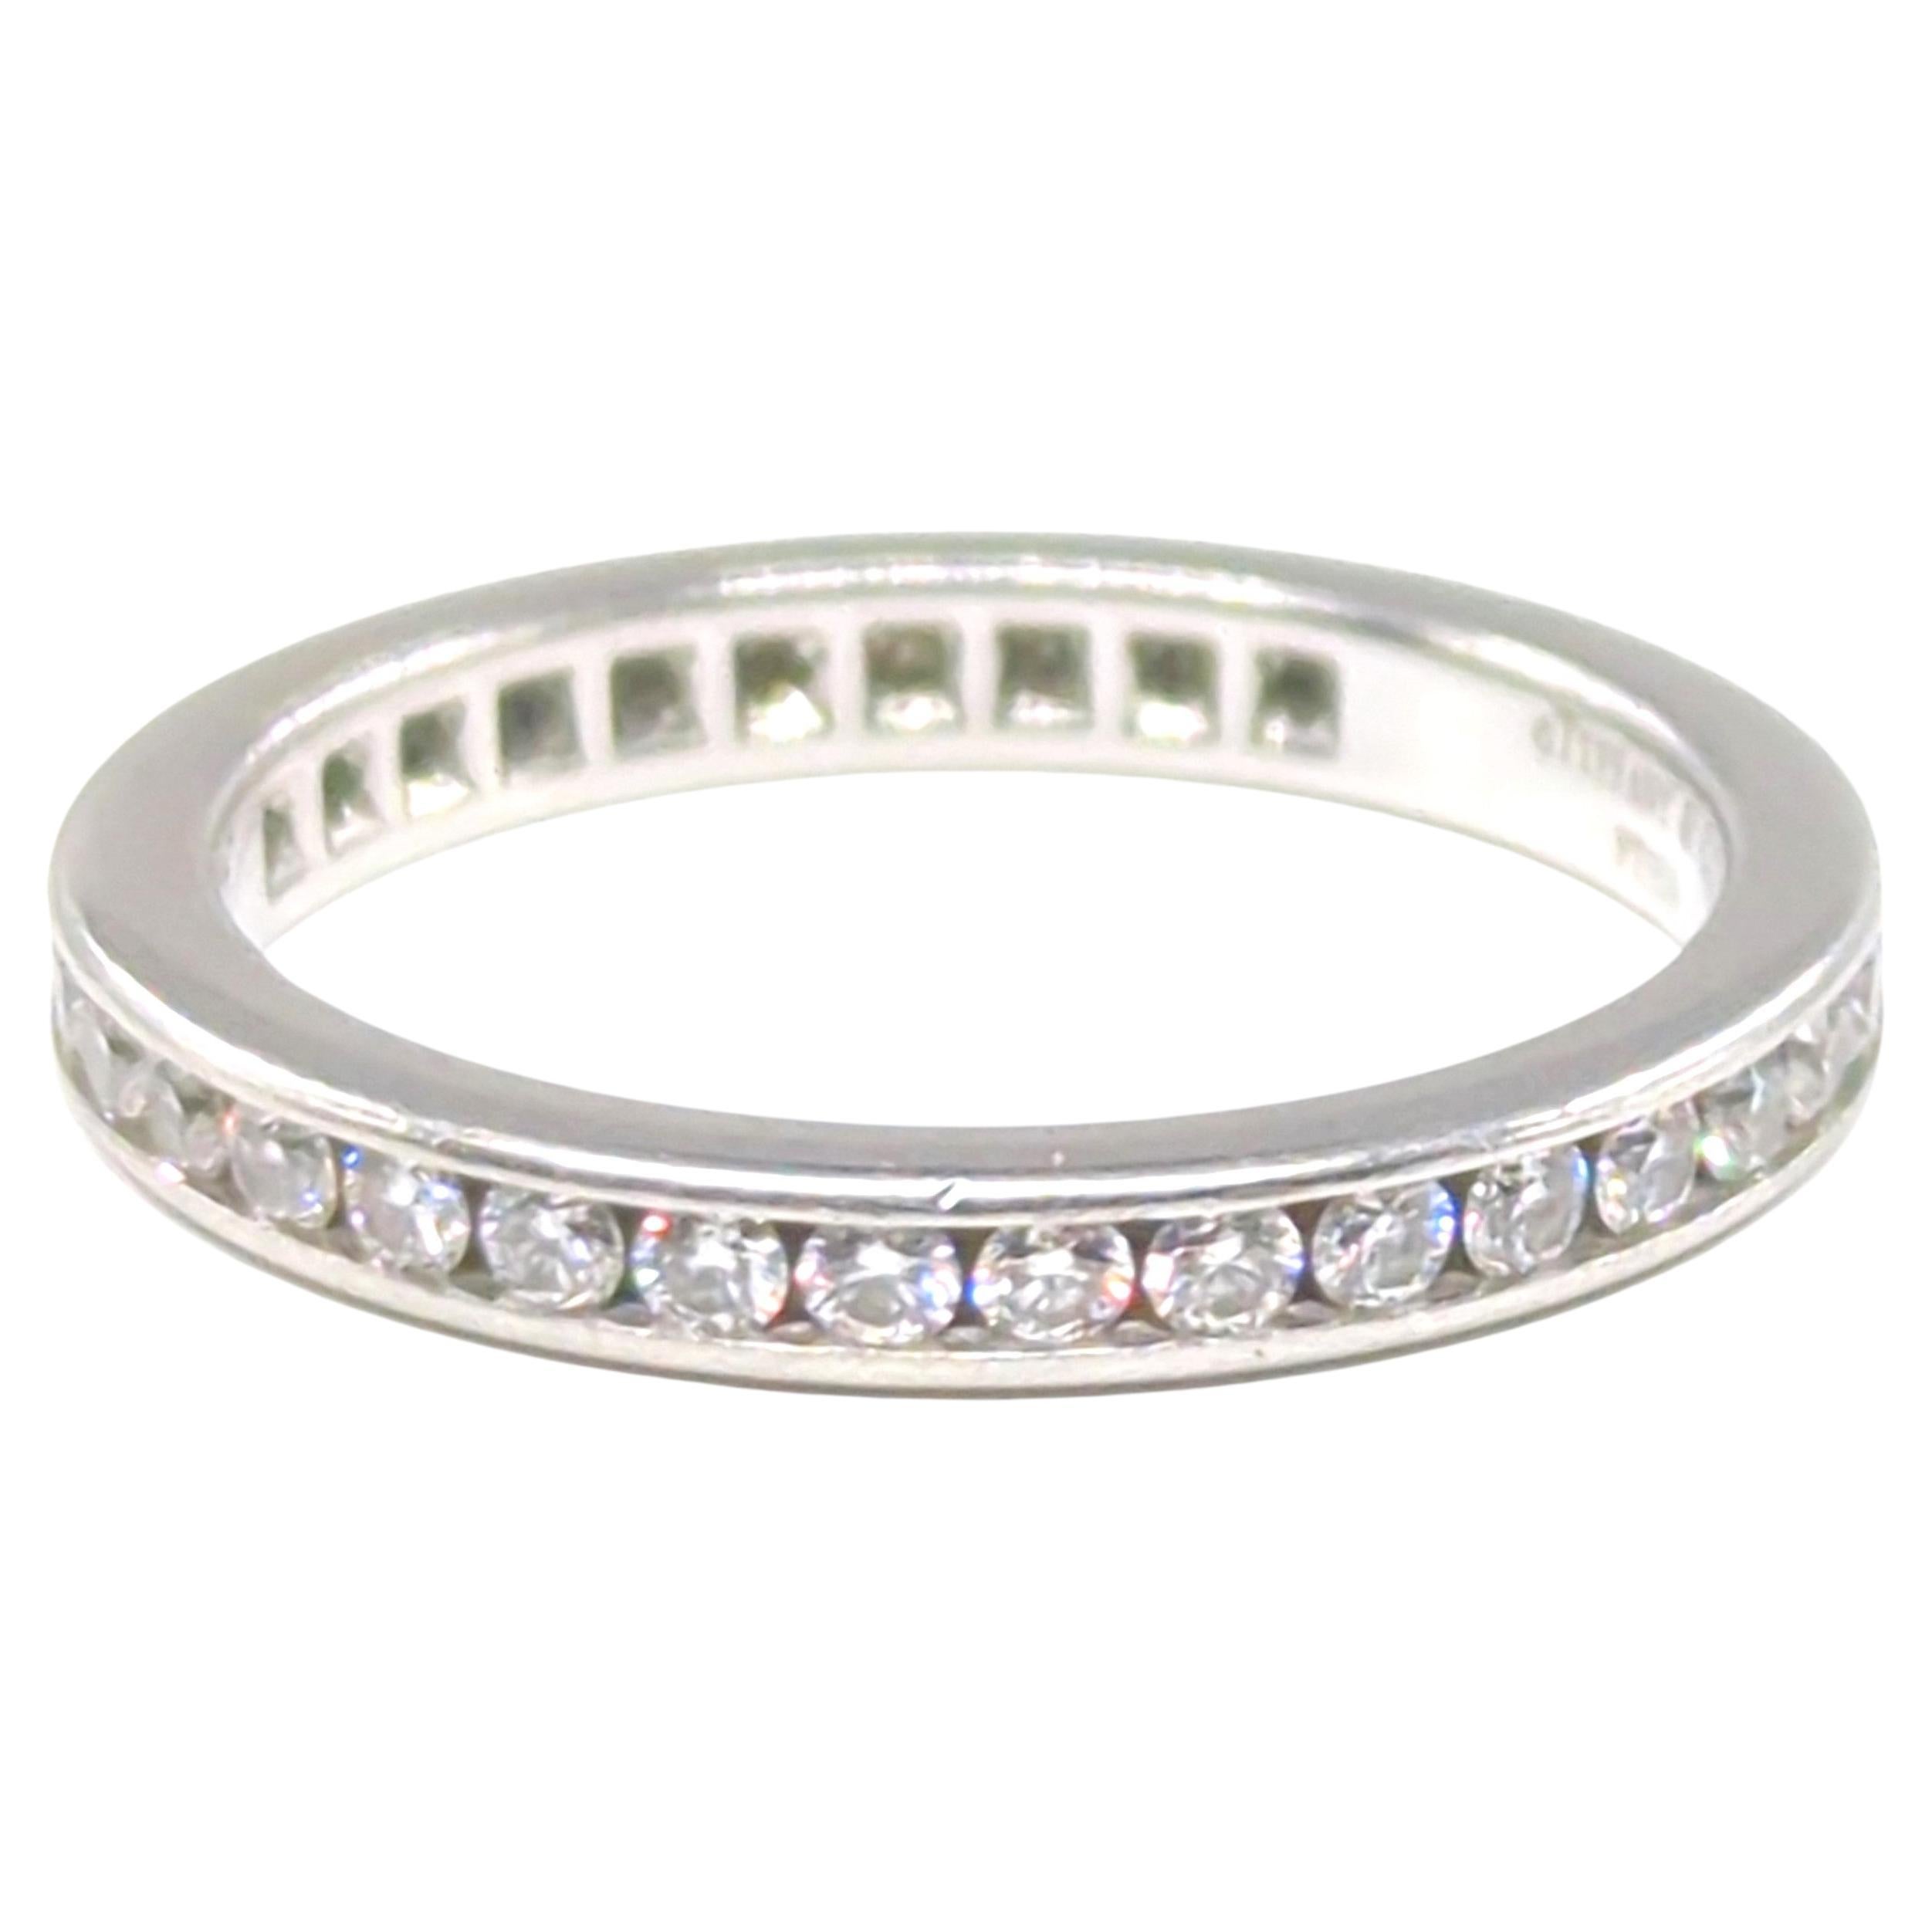 Tiffany & Co. Iconic Diamond Full Circle Eternity Band Ring 0.73 CTW Size 5.5 In Good Condition For Sale In Richmond, CA